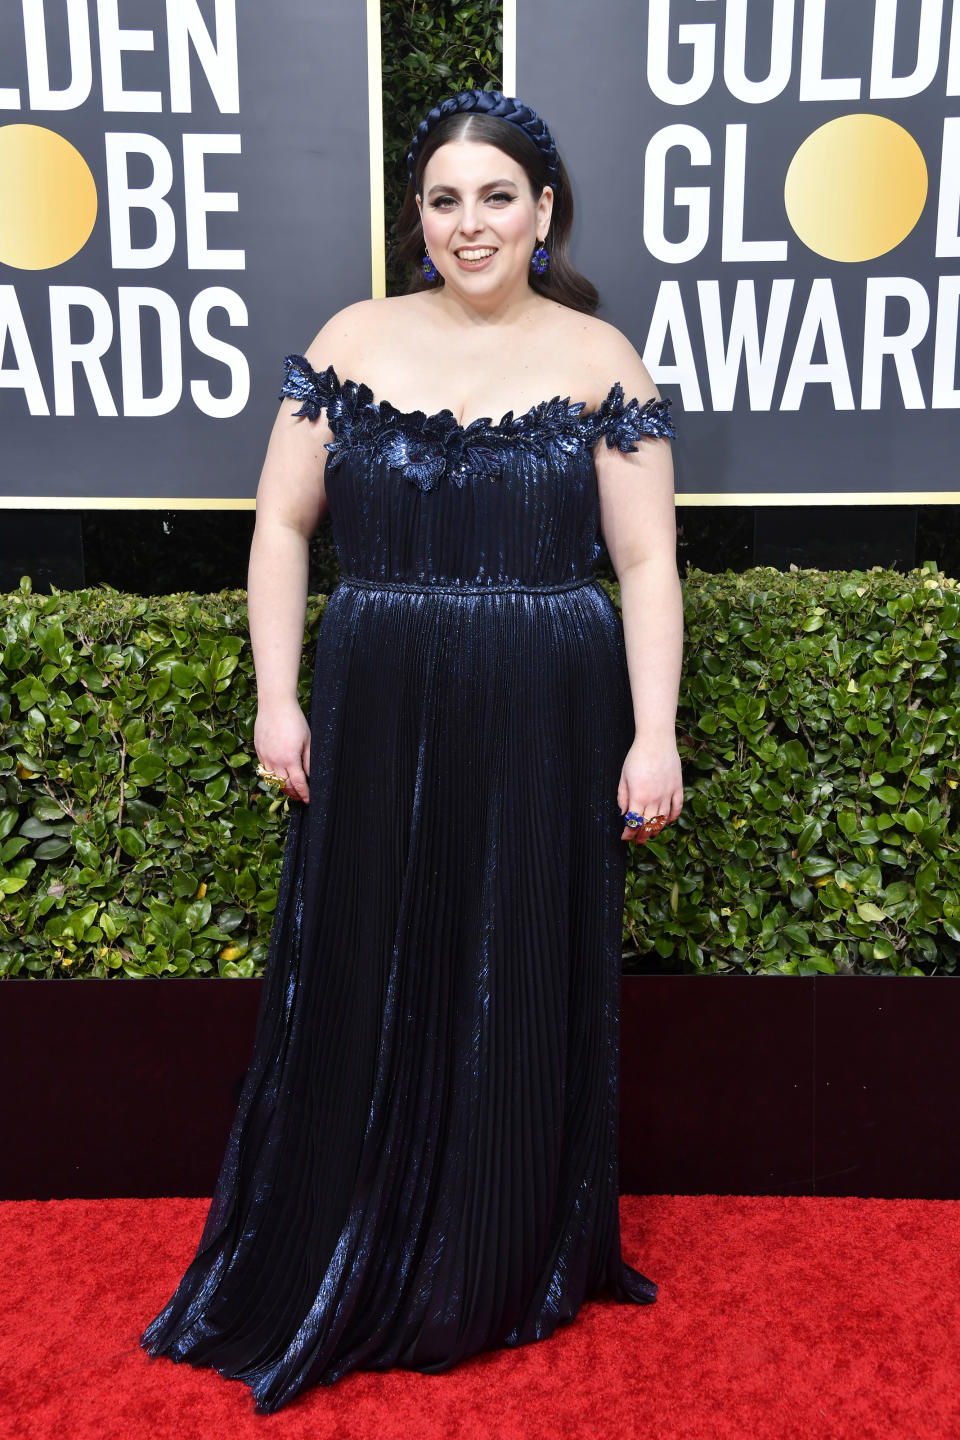 BEVERLY HILLS, CALIFORNIA - JANUARY 05: Beanie Feldstein attends the 77th Annual Golden Globe Awards at The Beverly Hilton Hotel on January 05, 2020 in Beverly Hills, California. (Photo by Frazer Harrison/Getty Images)